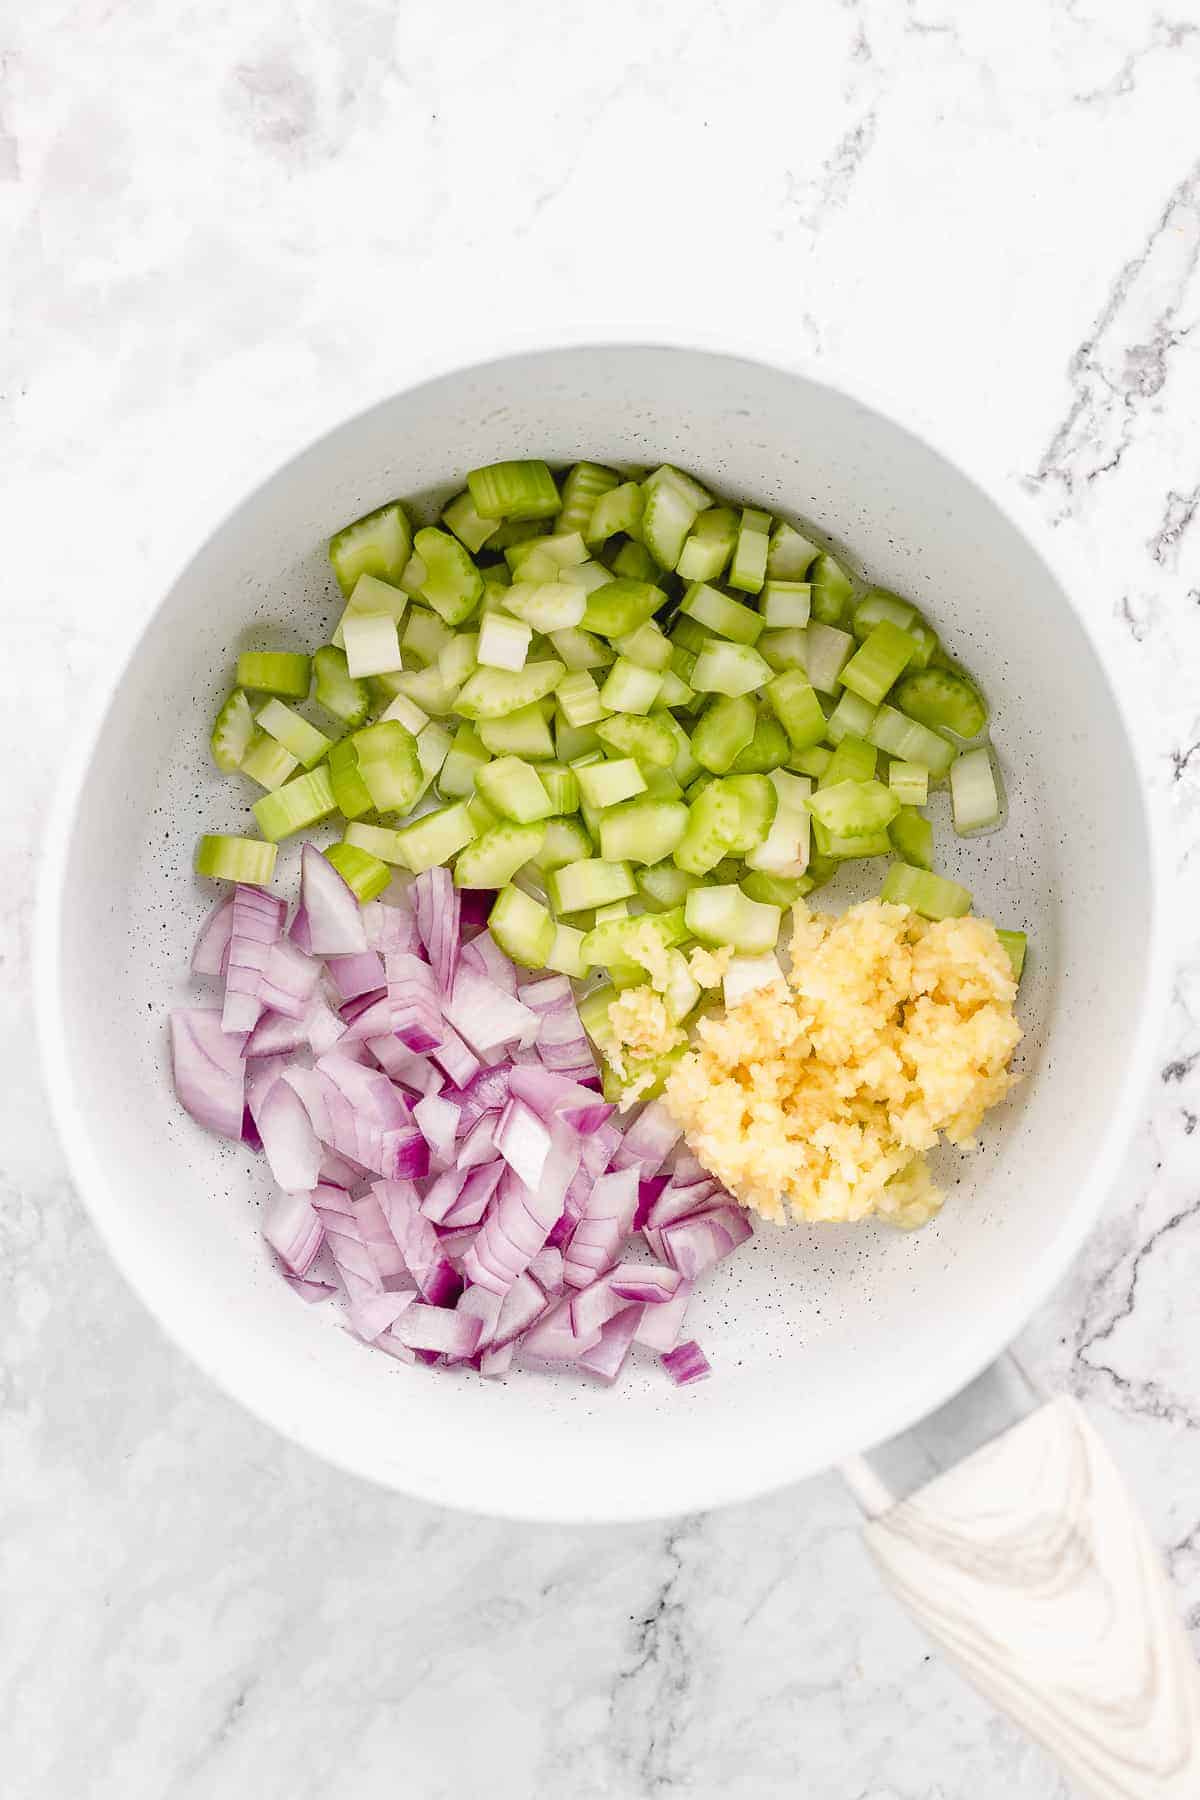 Red onion garlic and celery in a pan.